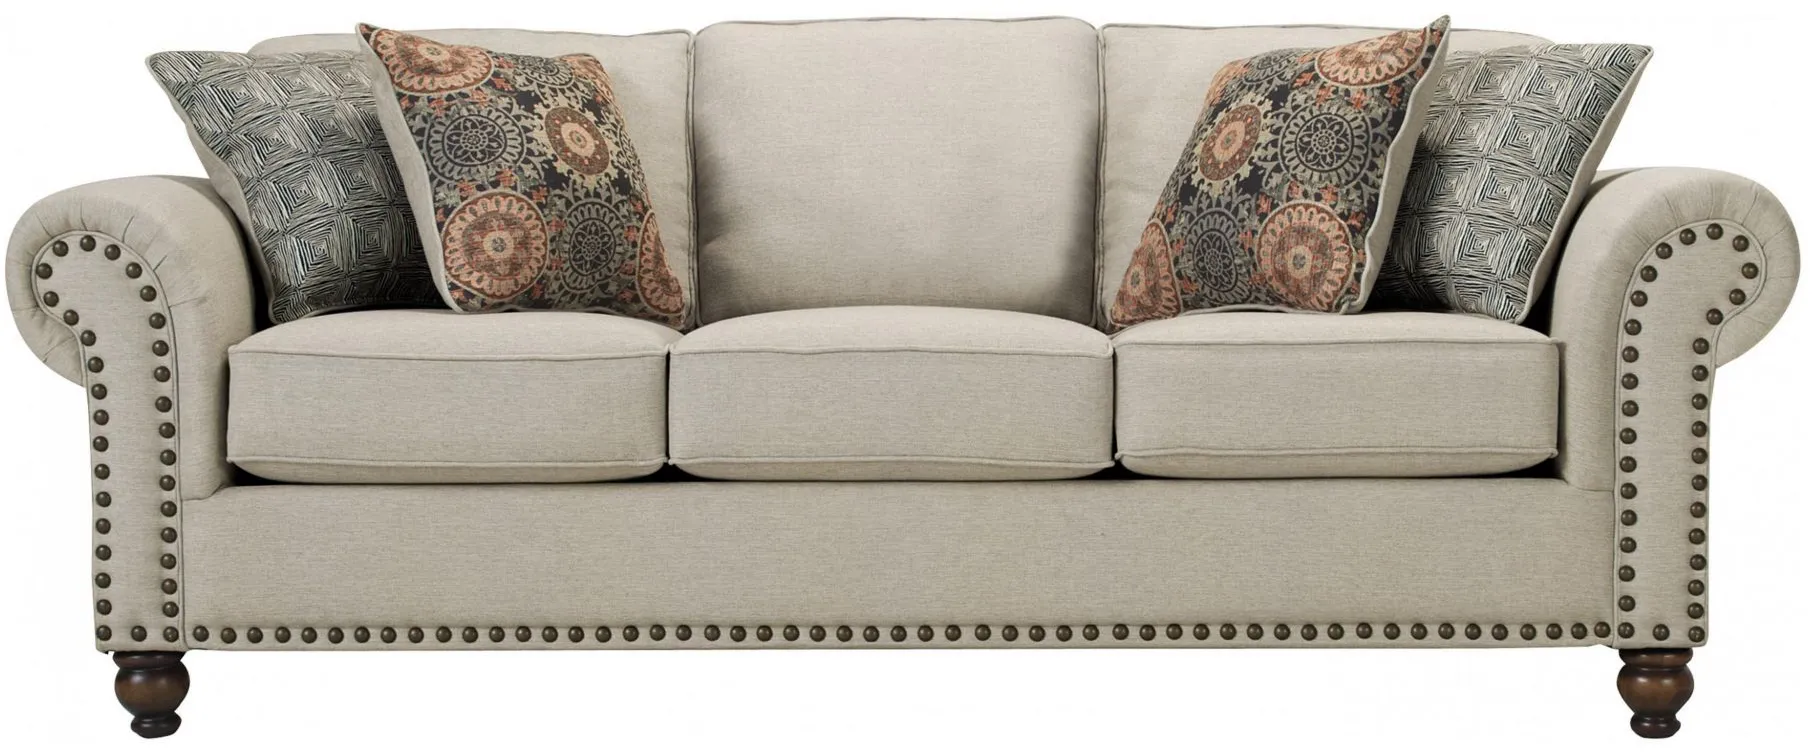 Corliss Sofa in Oatmeal / Walnut by Fusion Furniture